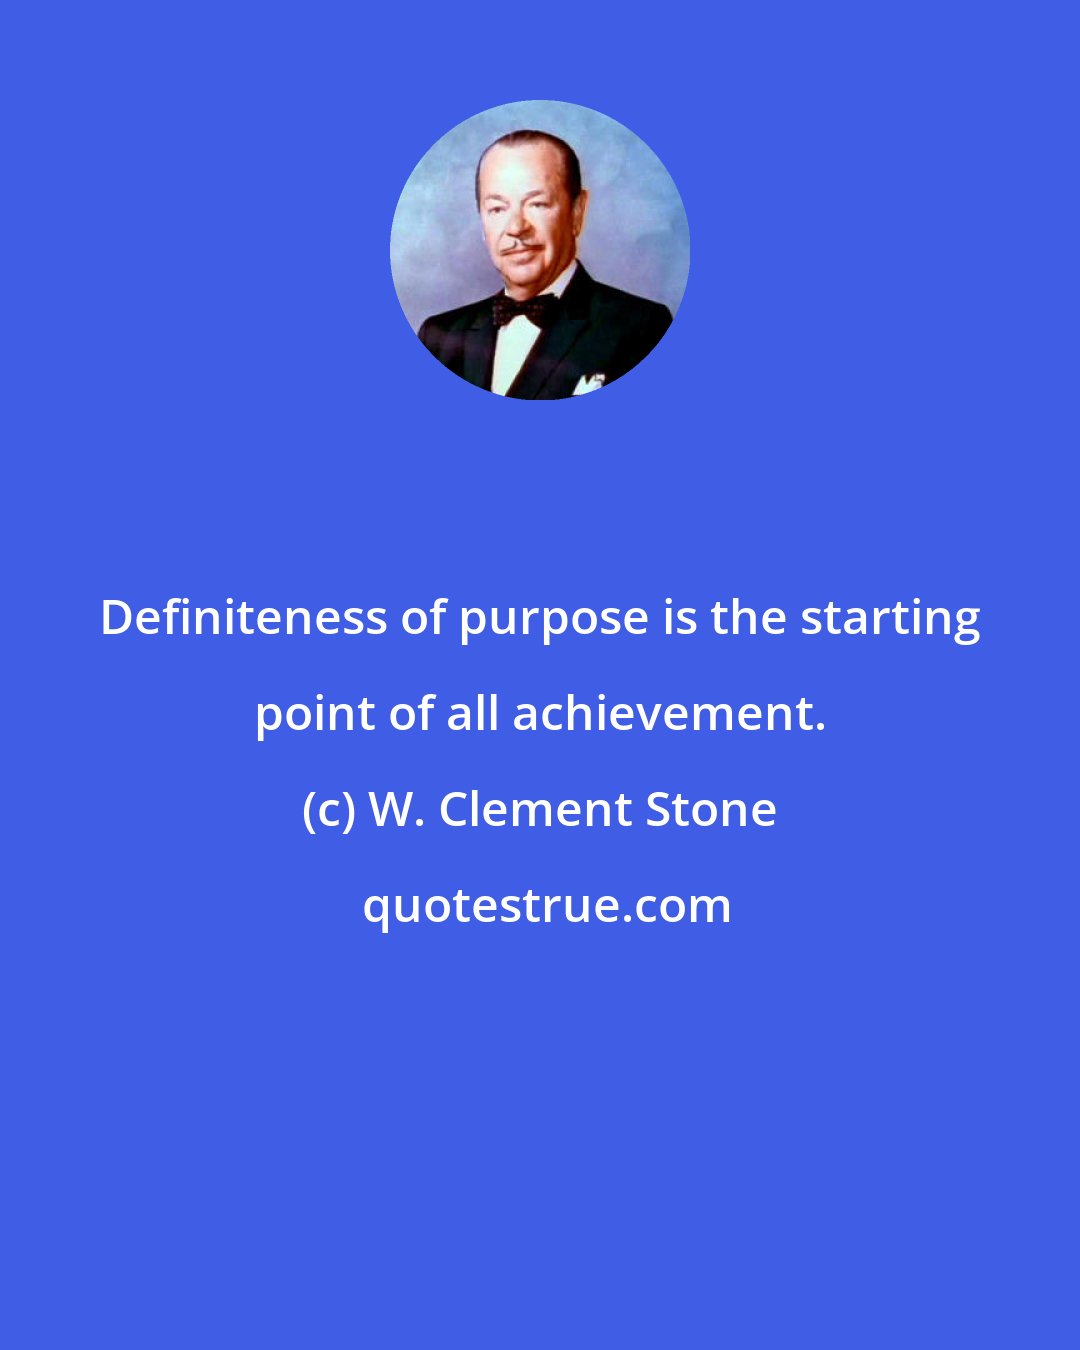 W. Clement Stone: Definiteness of purpose is the starting point of all achievement.